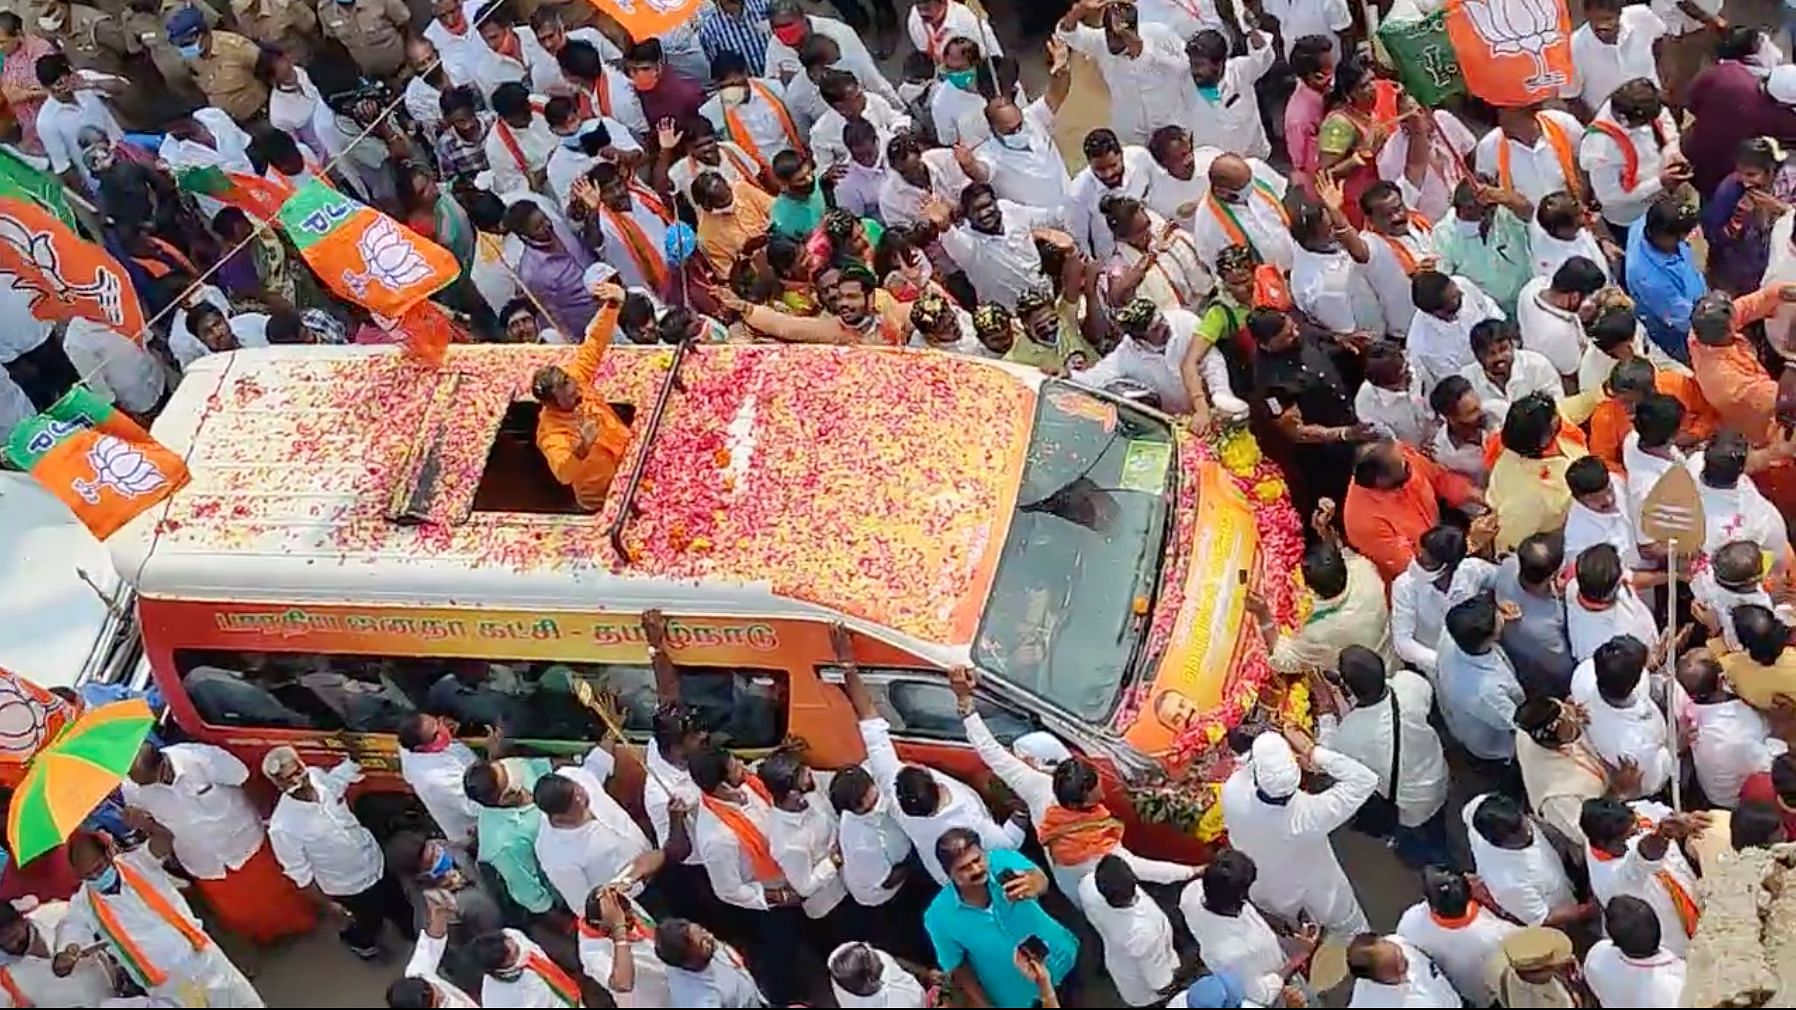 The yatra is intended to resume from Vadivudai Amman temple in Tiruvottriyur, Chennai.